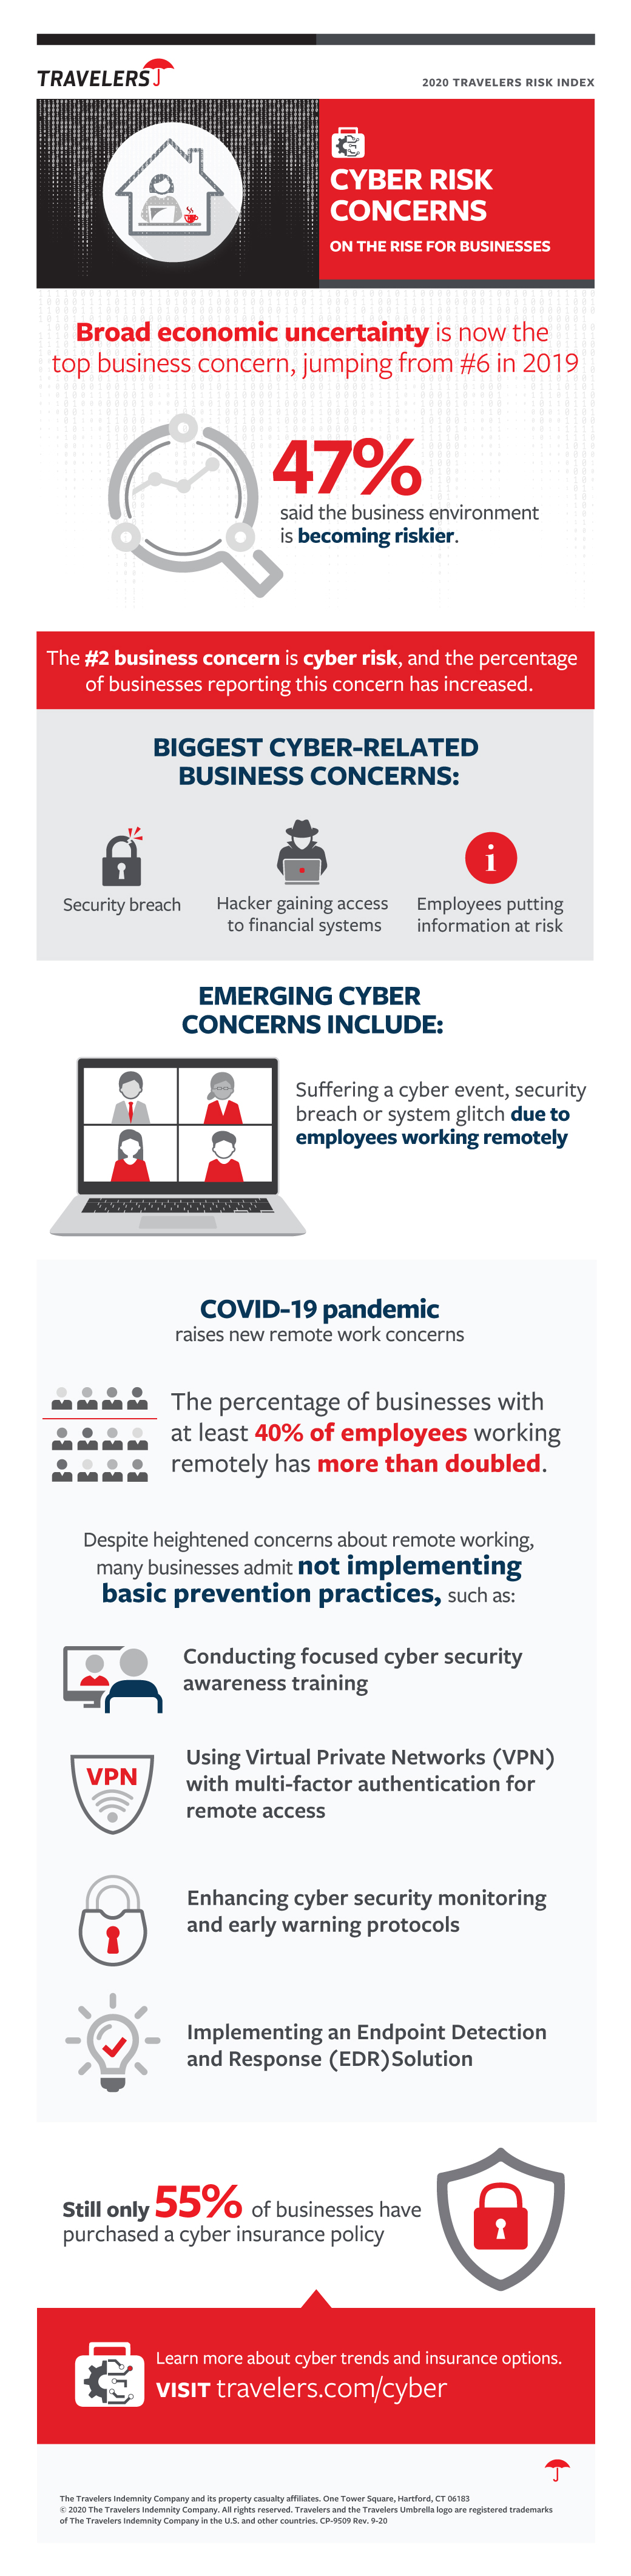 2020 Travelers Risk Index Cyber Risk Concerns on the Rise for Businesses, see below for details